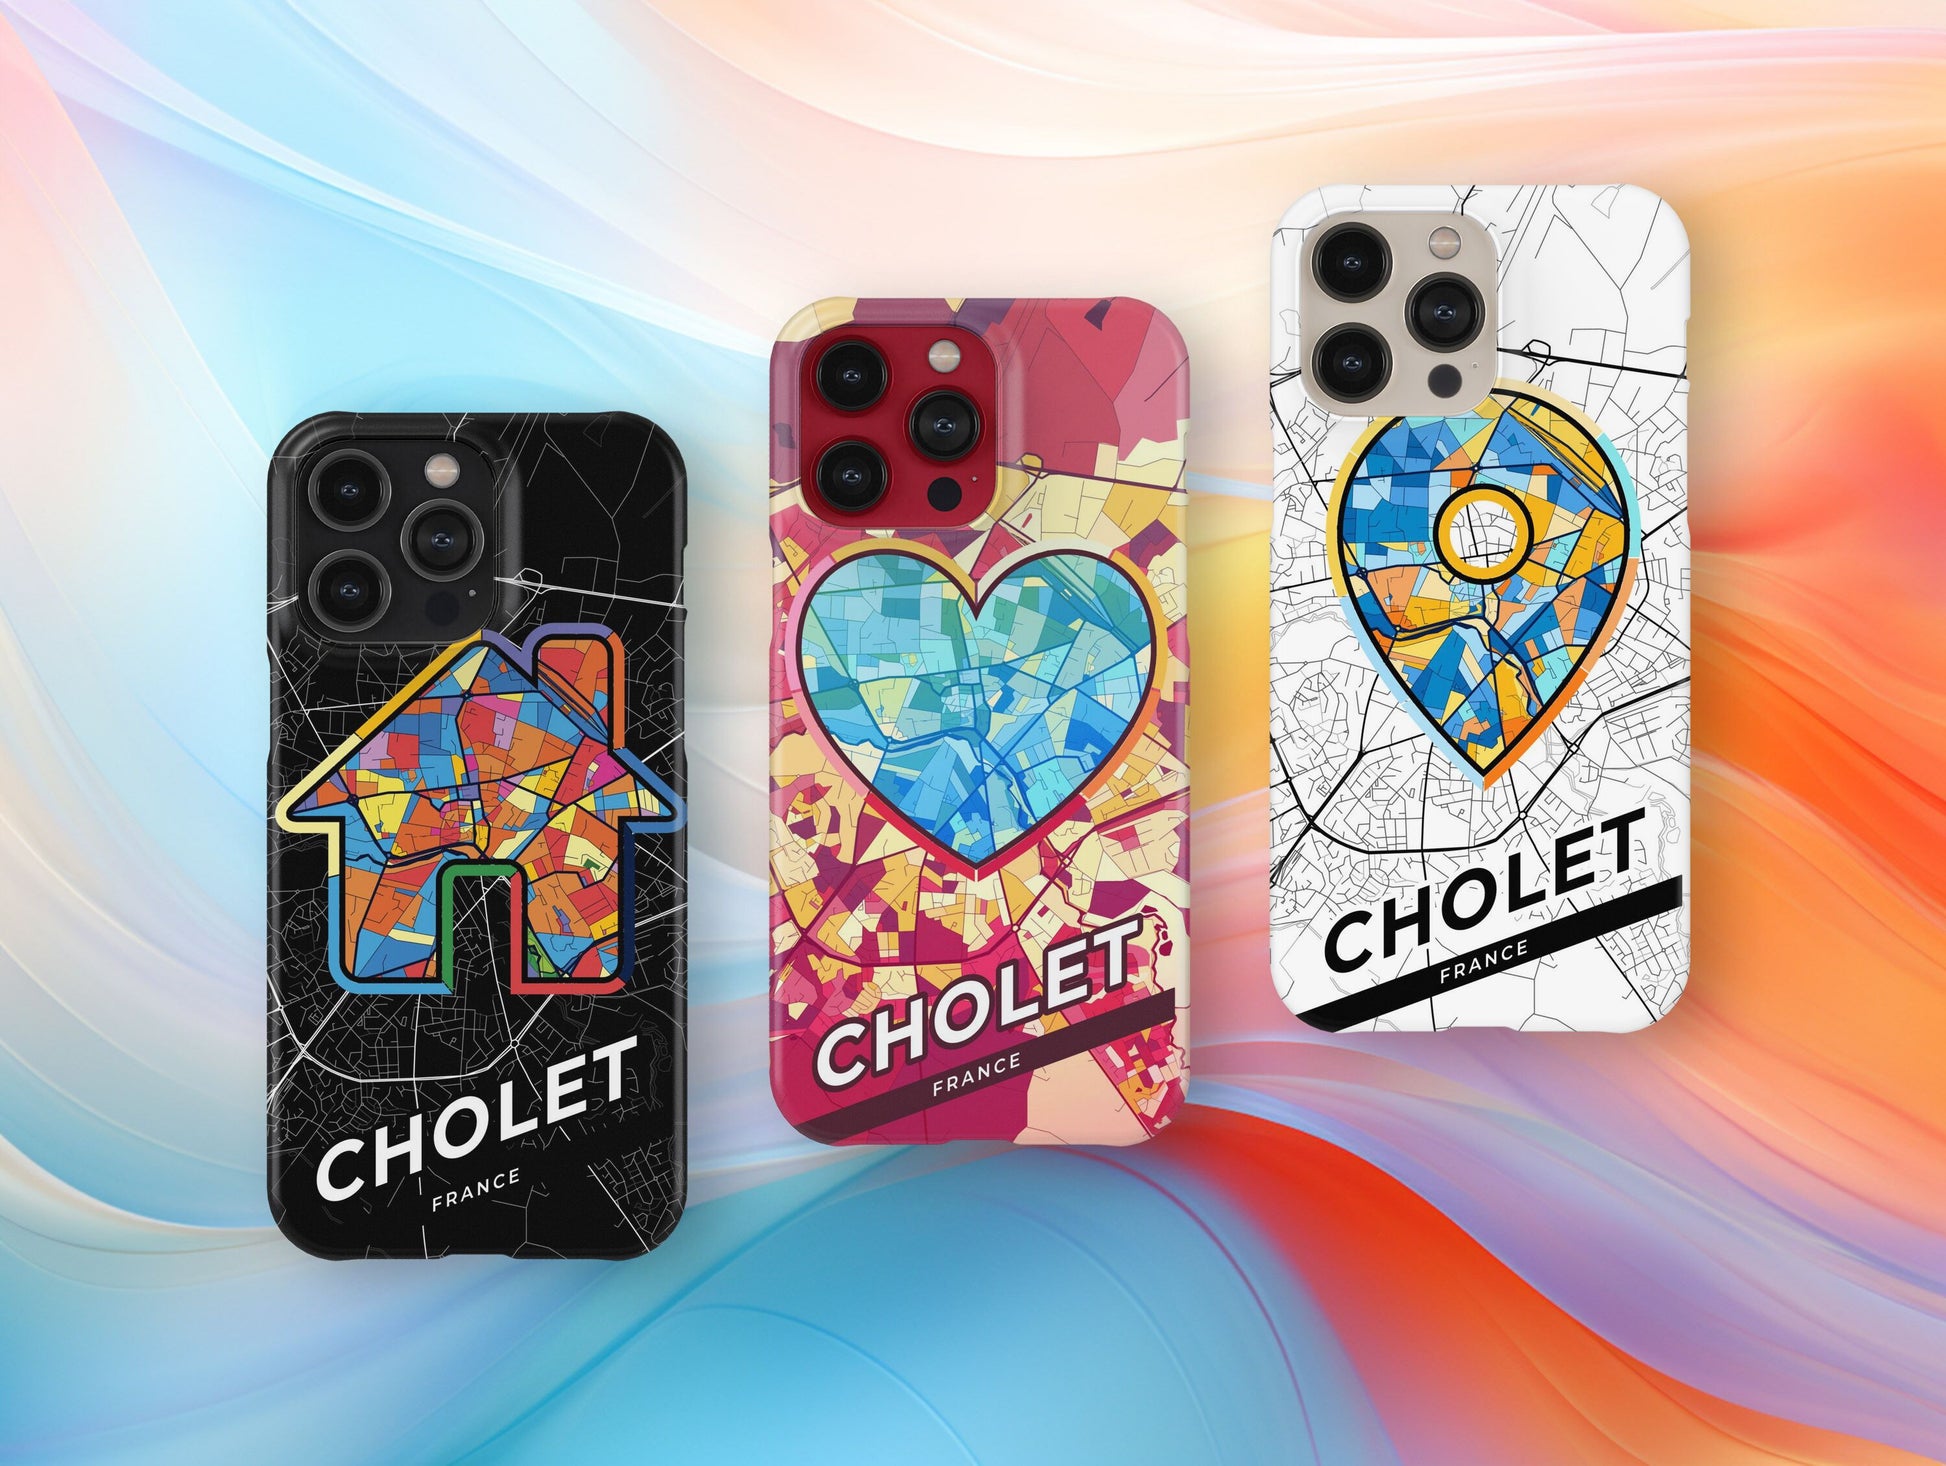 Cholet France slim phone case with colorful icon. Birthday, wedding or housewarming gift. Couple match cases.